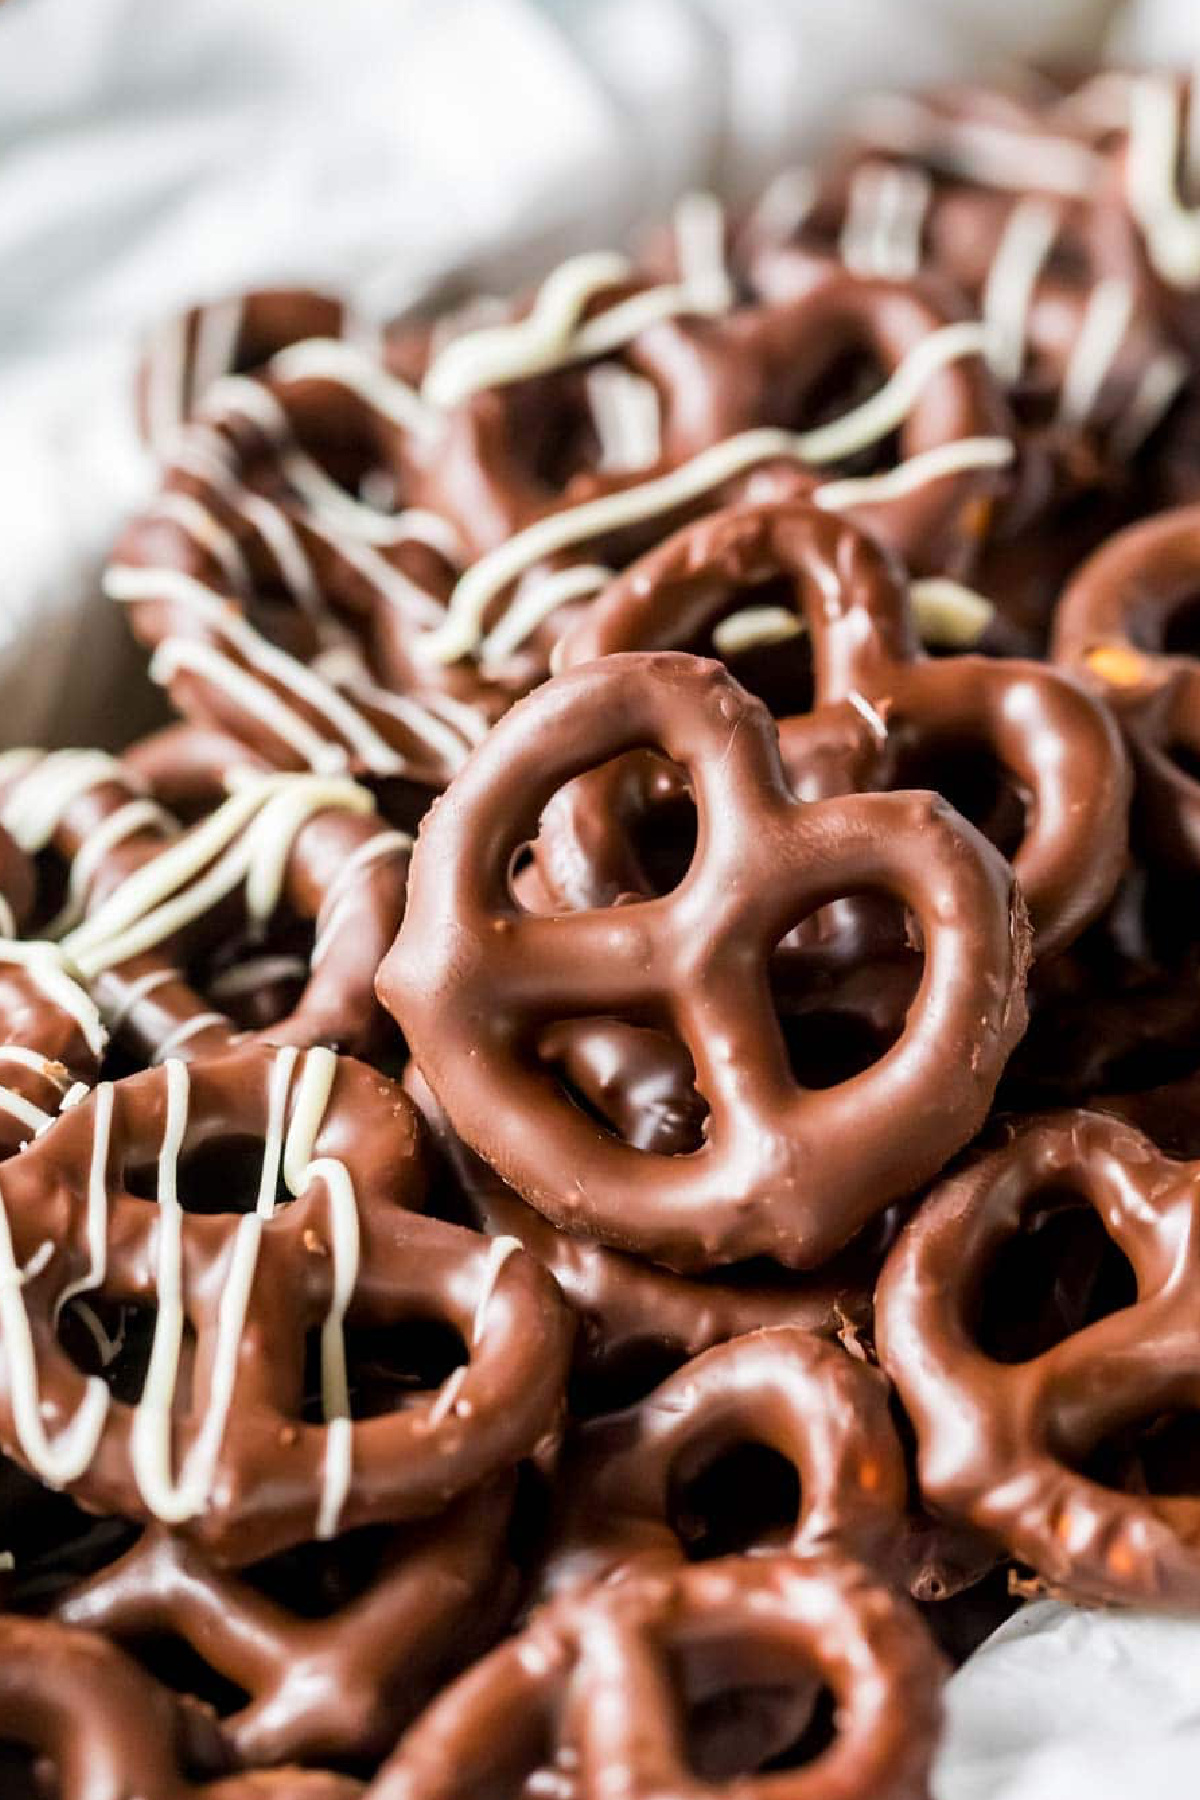 Cheap Party Food Ideas - Chocolate Covered Pretzels